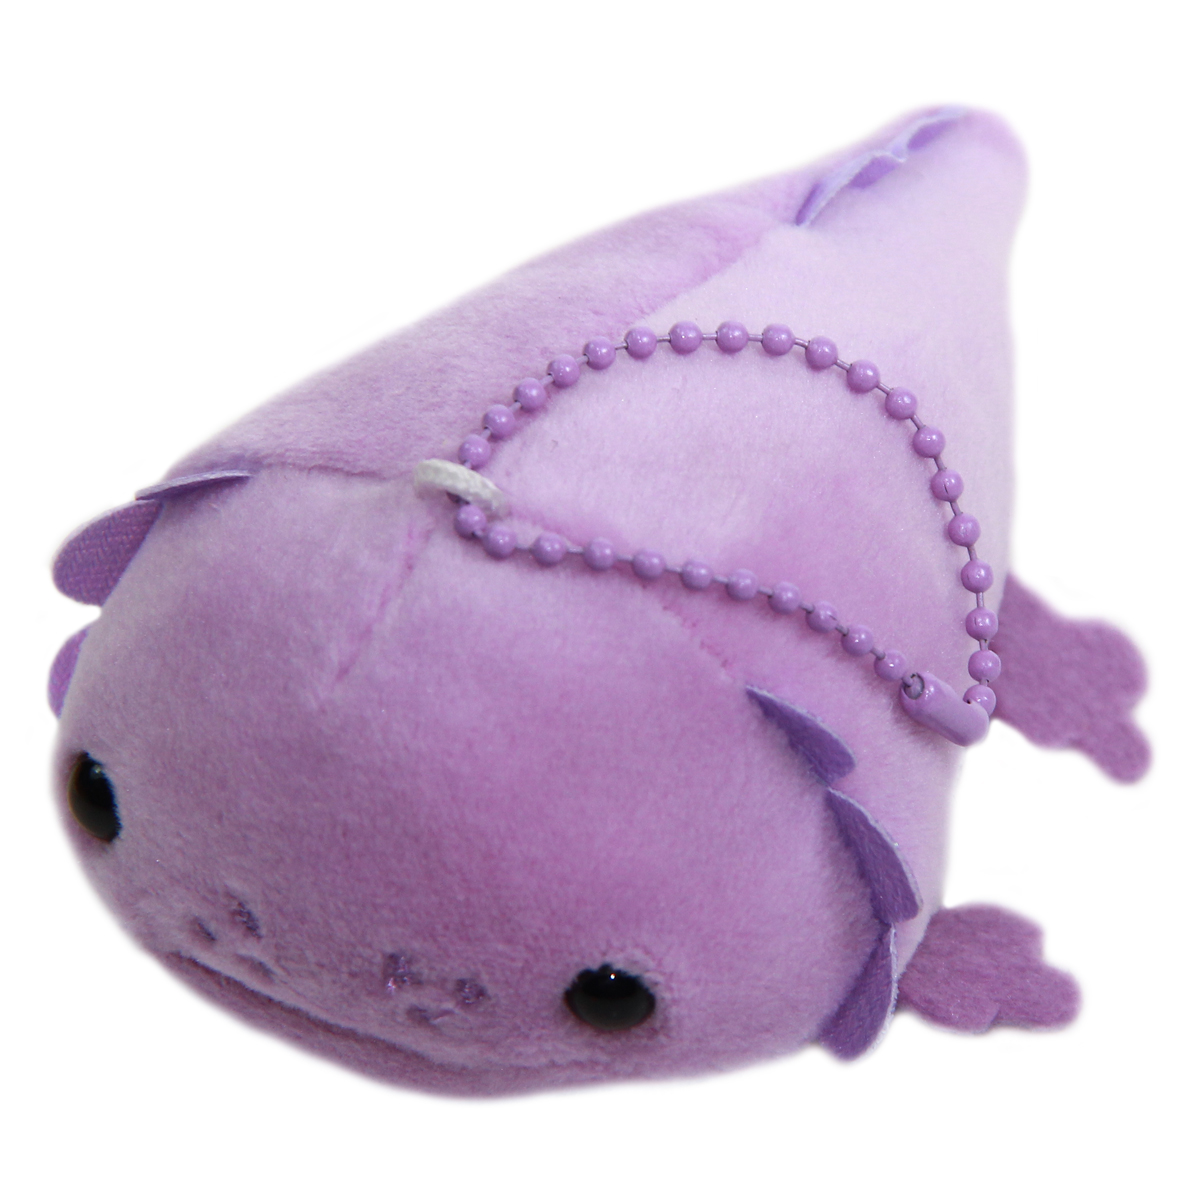 Kawaii Axolotl Plushie Small Keychain Collection Super Soft Plush Toy Purple 4 Inches